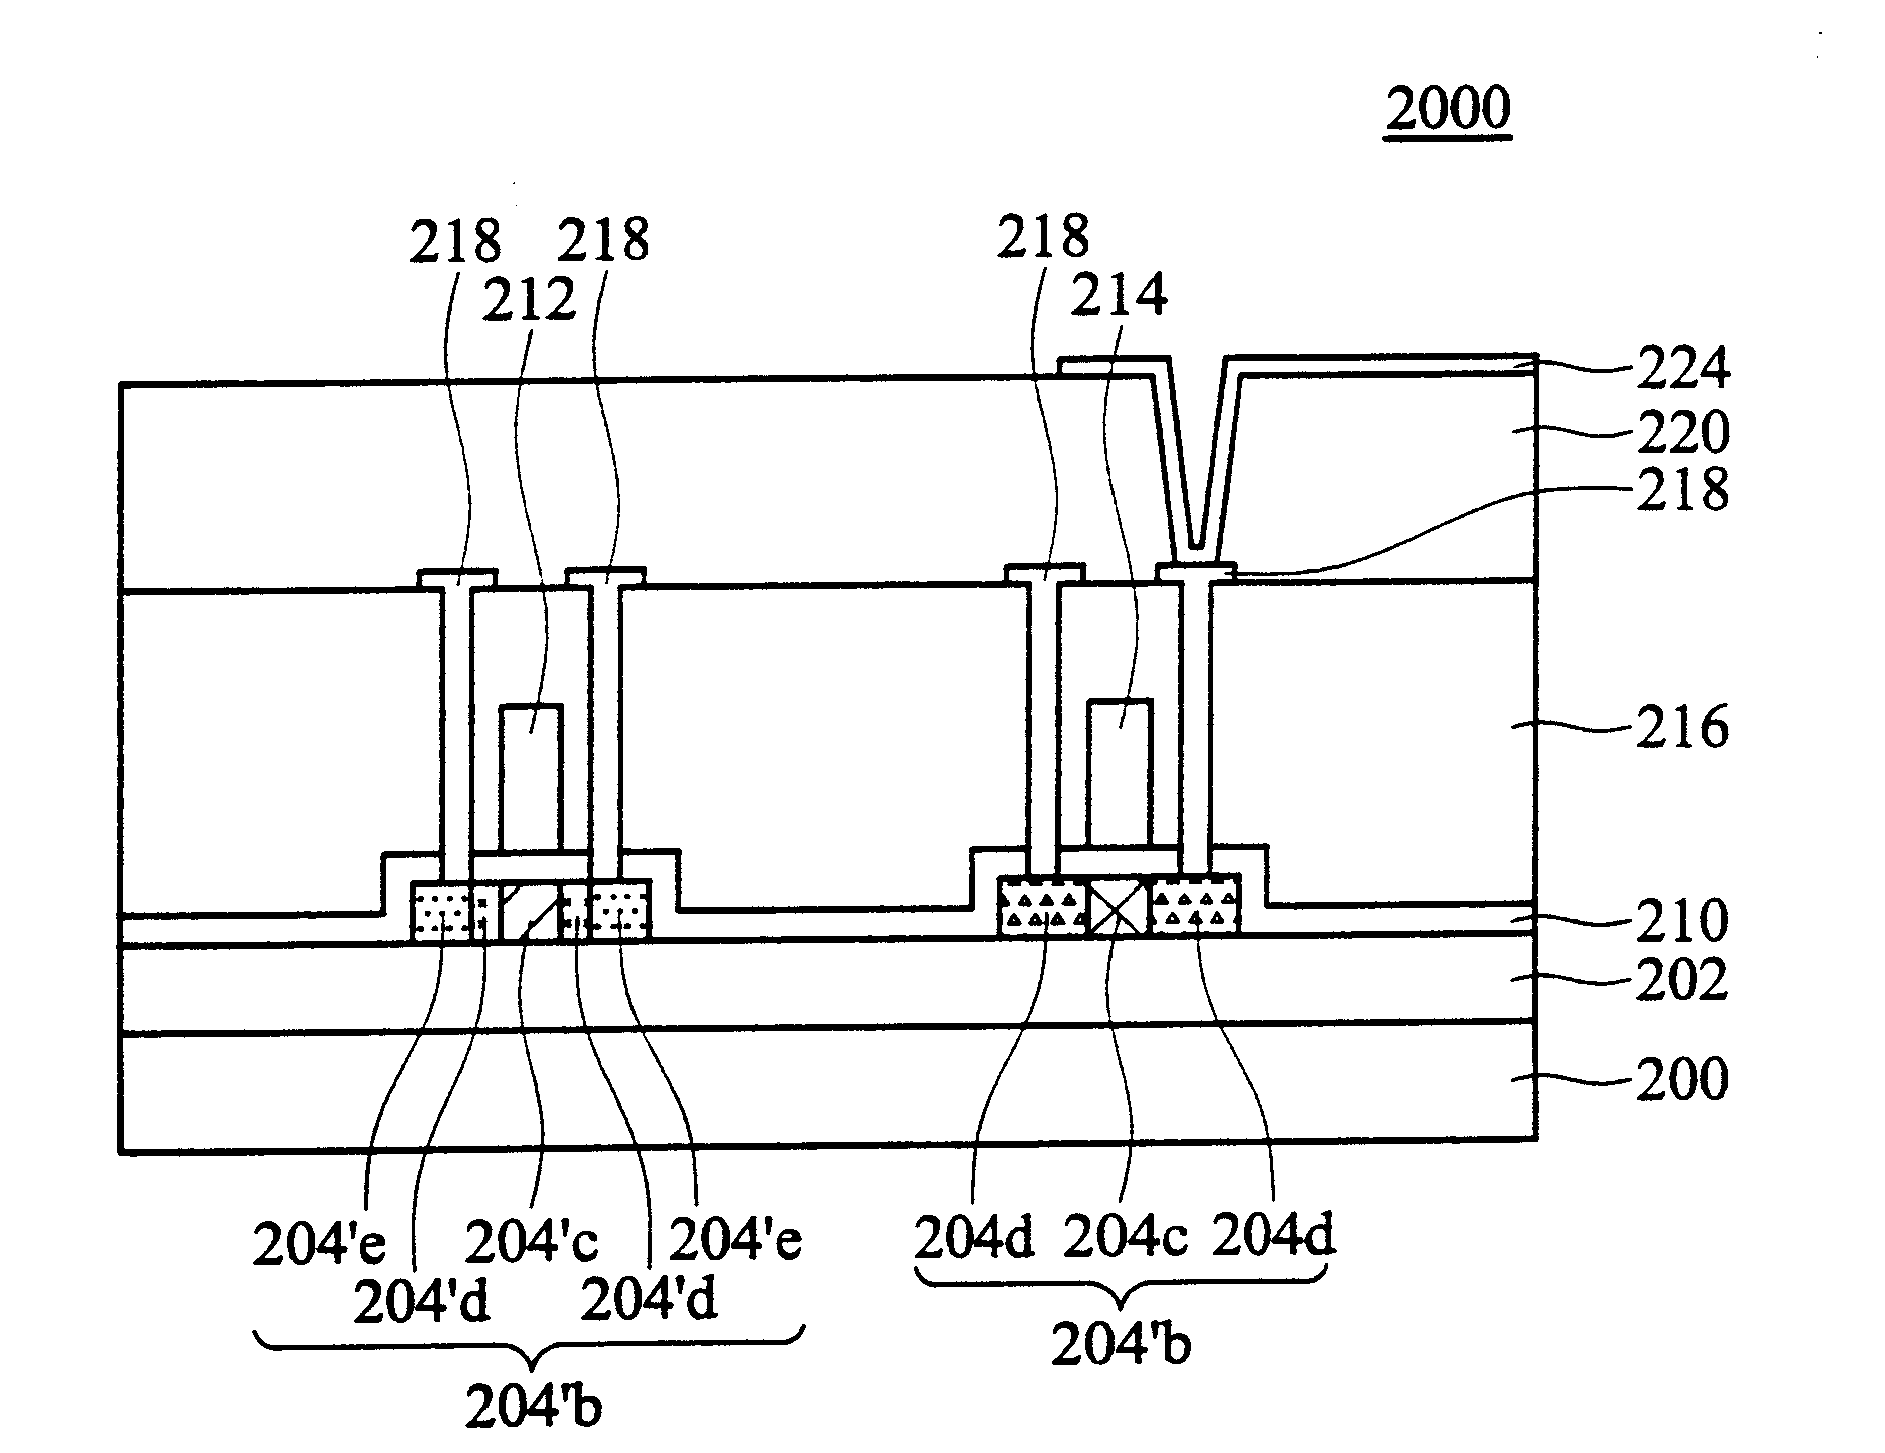 Method of fabricating an organic electroluminescent device and system of displaying images